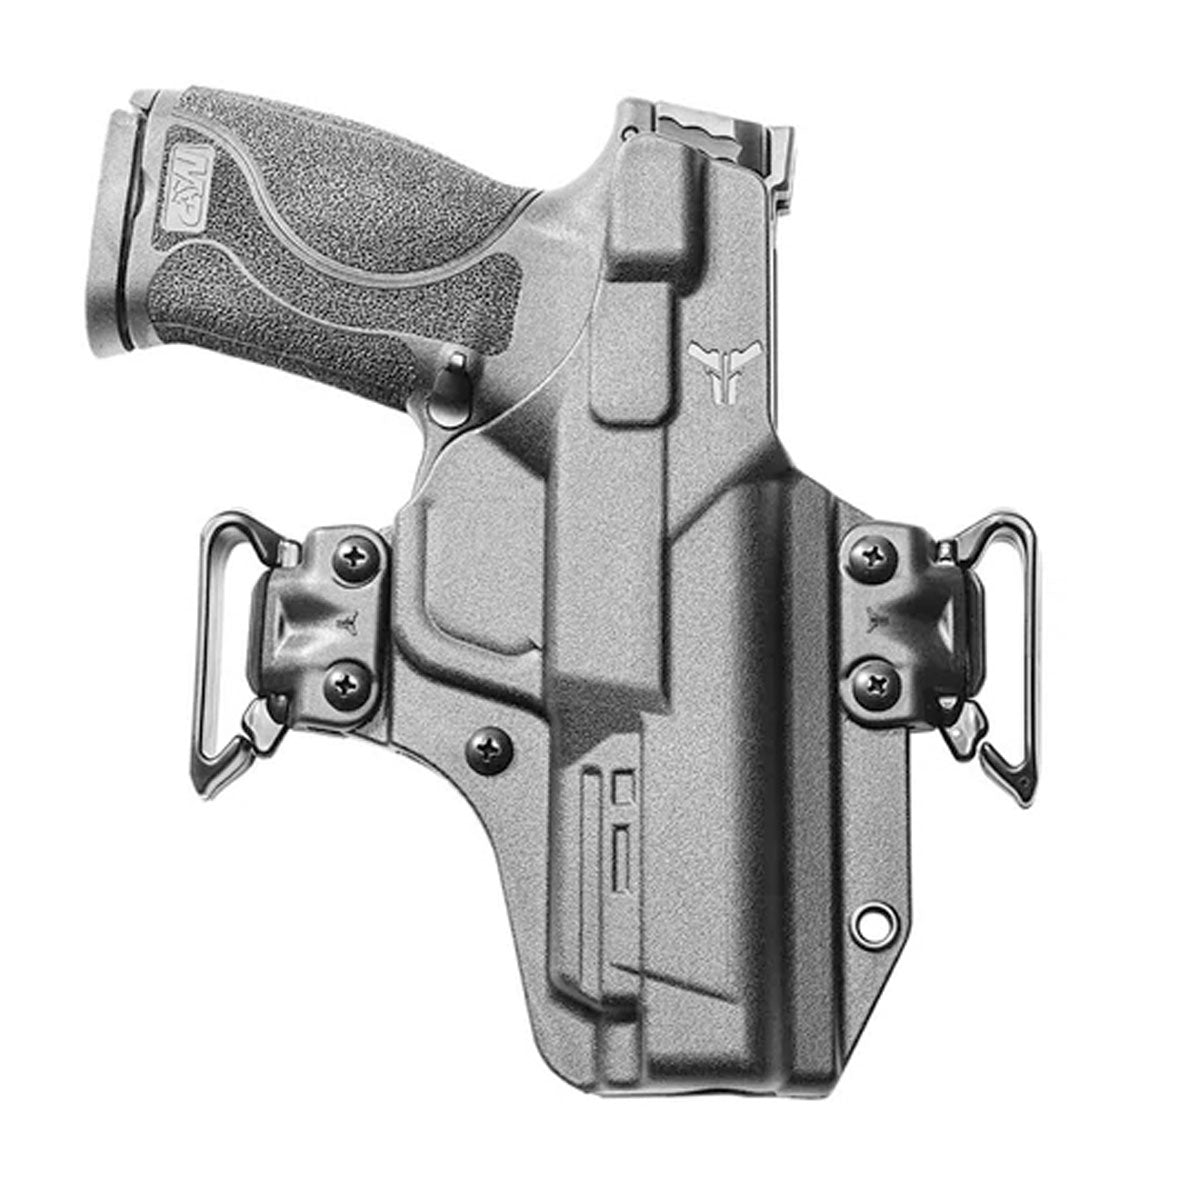 Blade-Tech Total Eclipse 2.0 Modular Holster Holsters Blade-Tech Holsters S&W - M&P 2.0 - 9/40/45 (4.25") Tactical Gear Supplier Tactical Distributors Australia